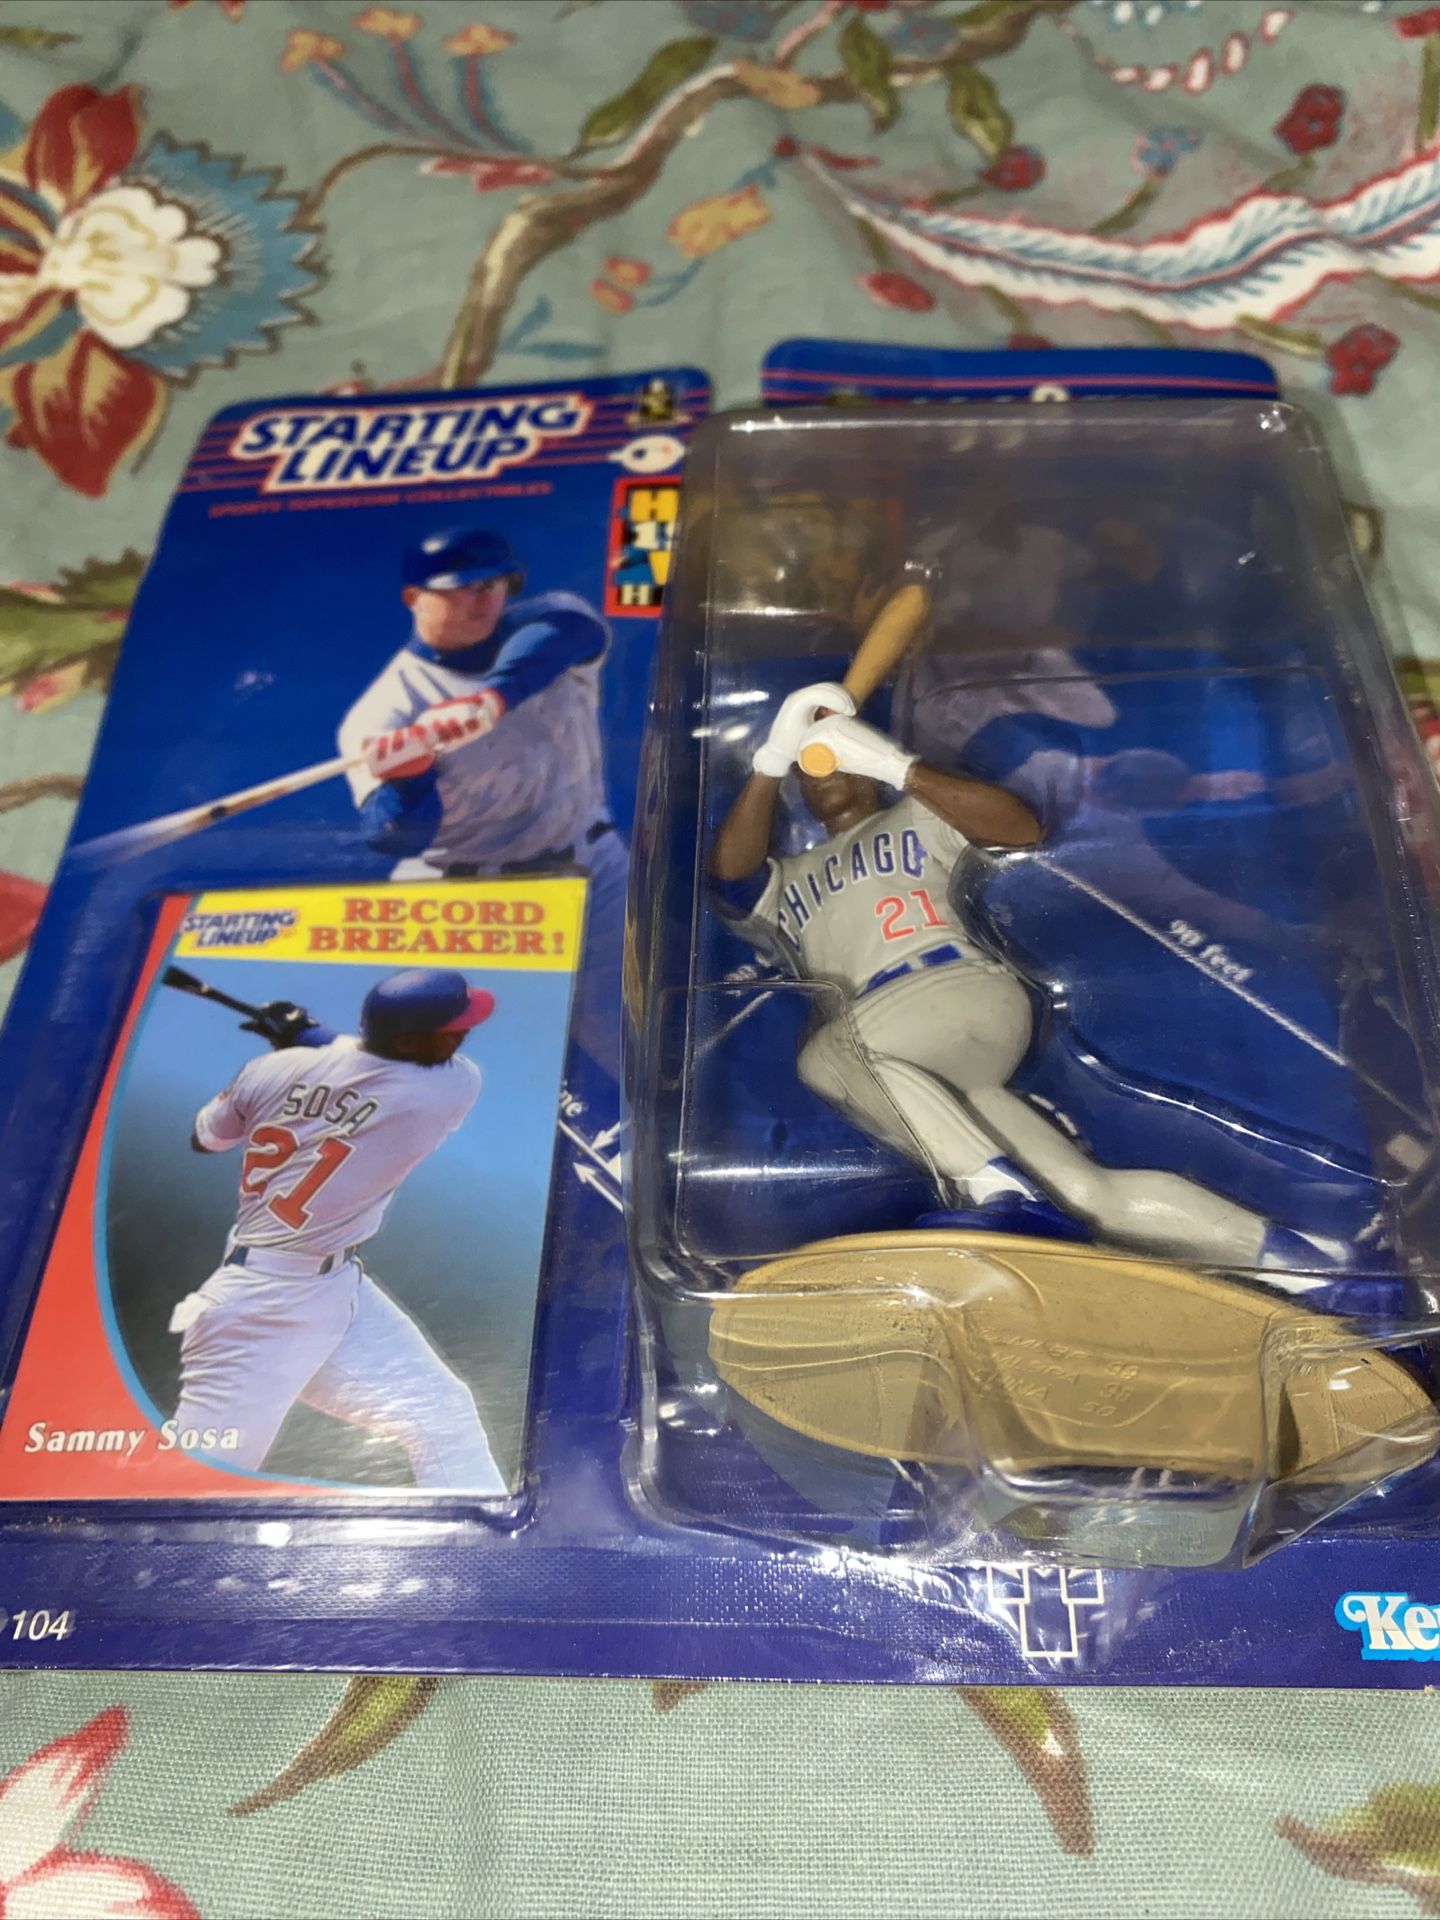 1998 MLB Starting Lineup Sammy Sosa Chicago Cubs Action Figure New Sealed Card